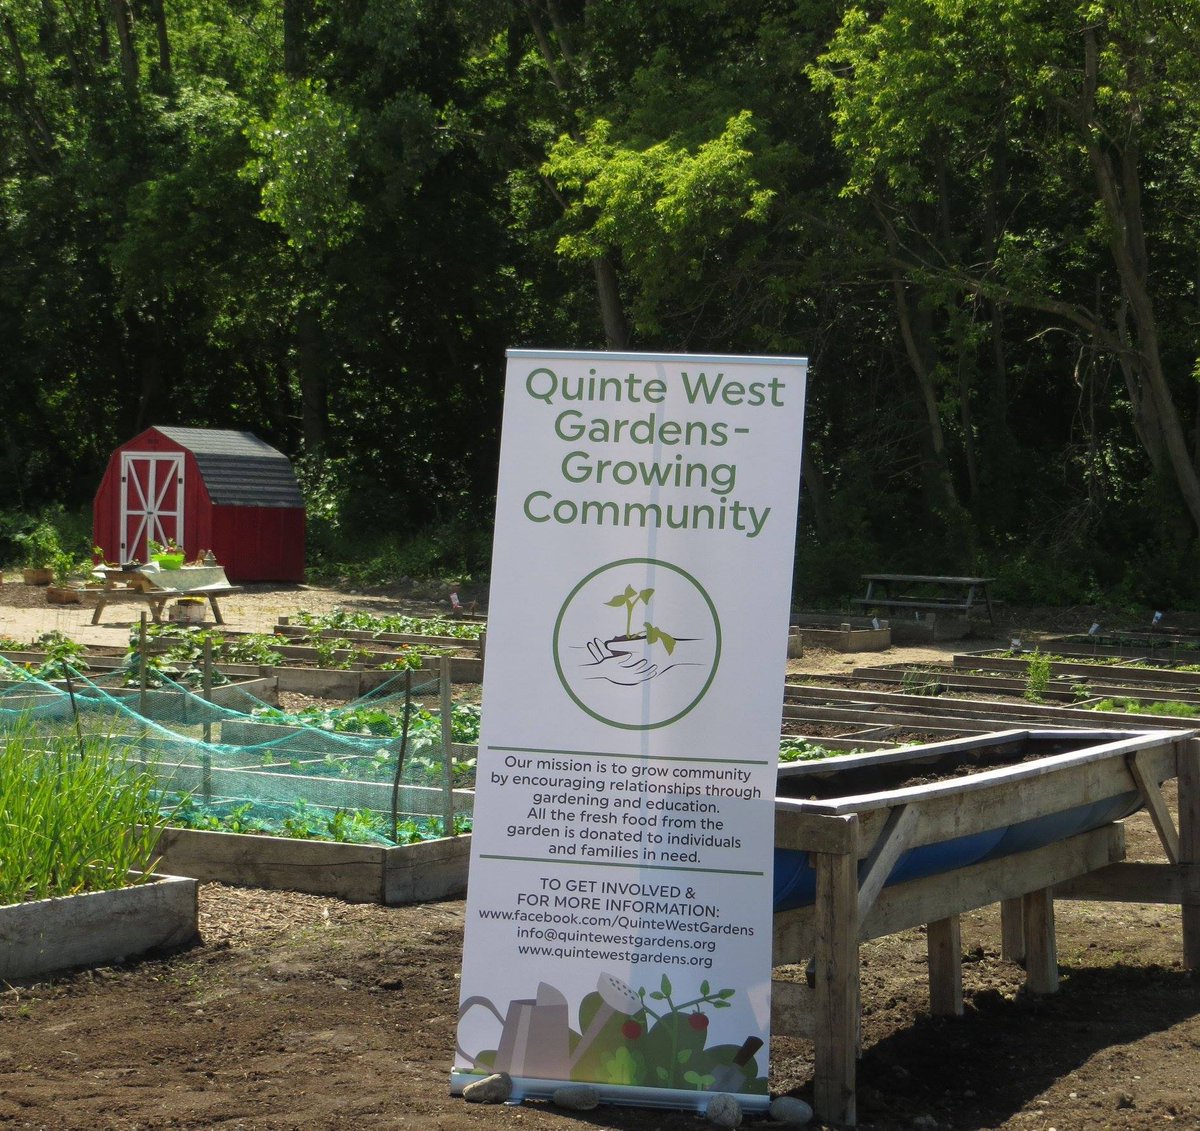 COUNCIL MEETING TODAY Quinte West Council meets today at 4:30 p.m. Agenda items include: ➡An update from the Quinte West Gardens - Growing Community ➡ Reports on the Wolfe Street Industrial Park & updates for the Trenton Water Treatment Plant ➡ Proclamation requests